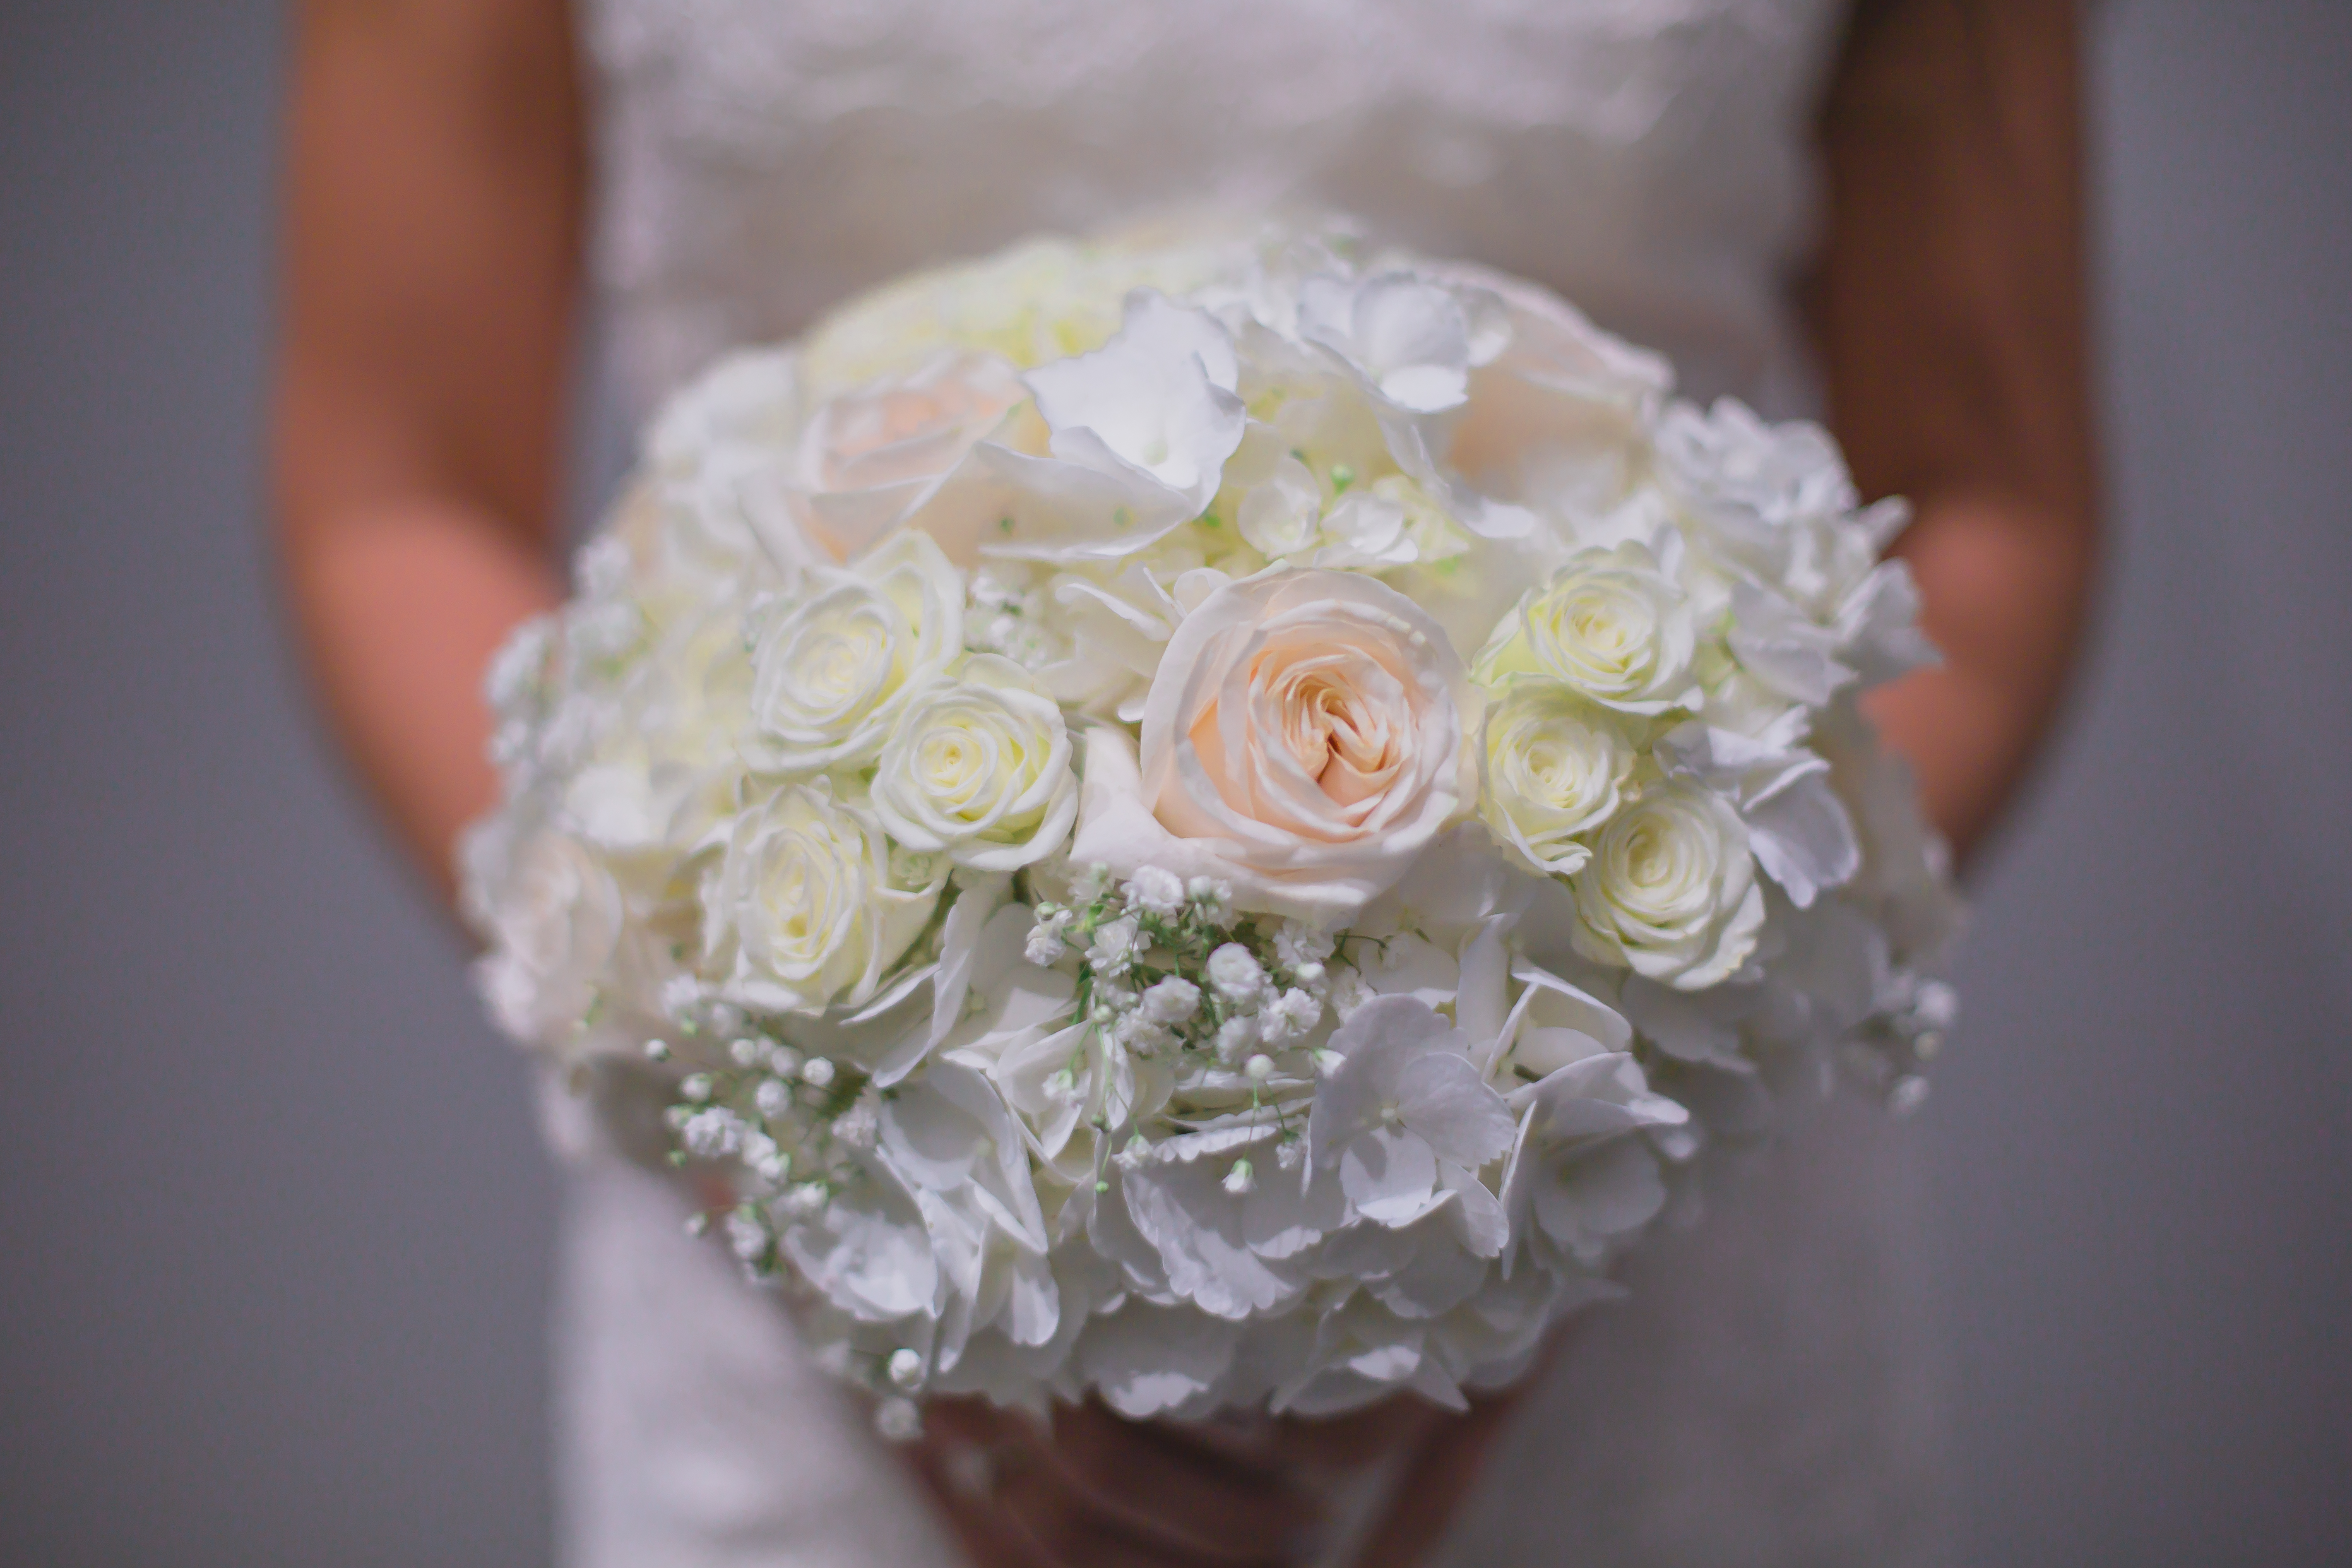 The Brides bouquet before the ceremony